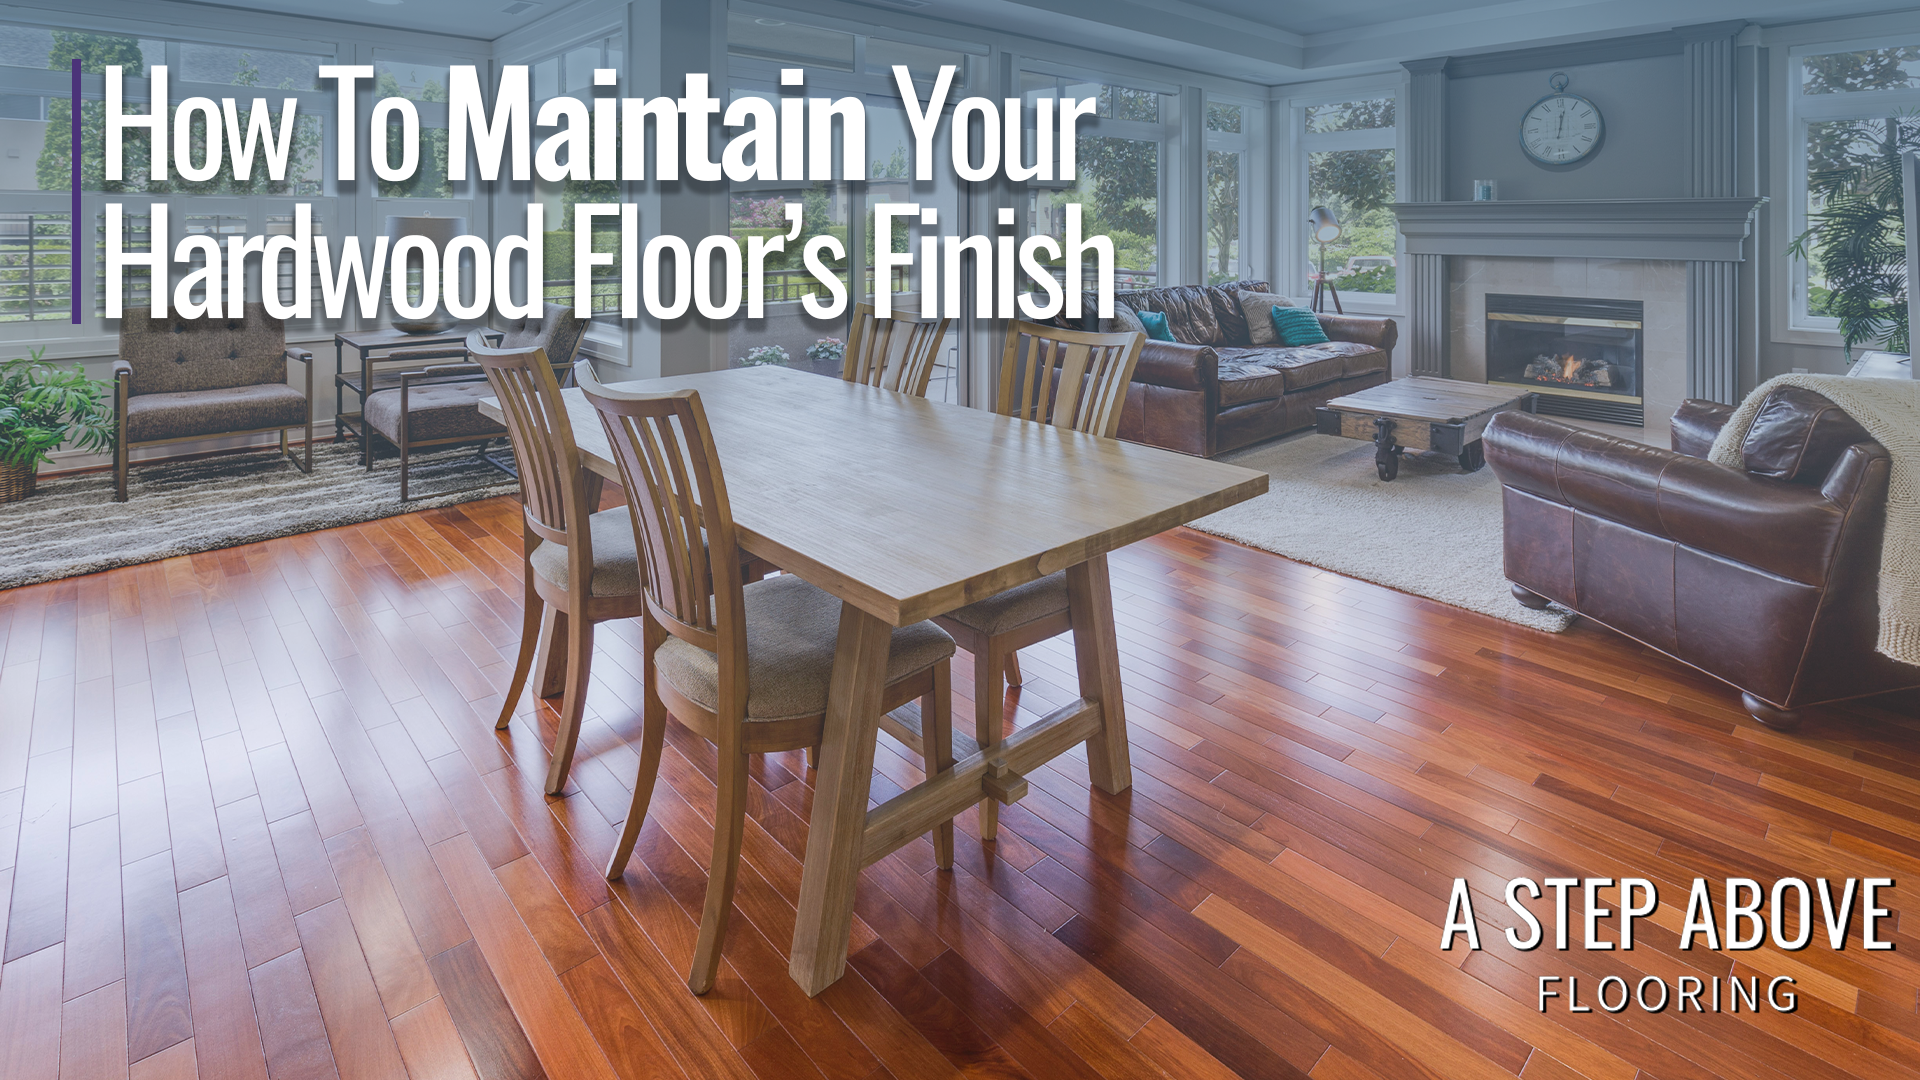 Dining room table and chairs on hardwood floor